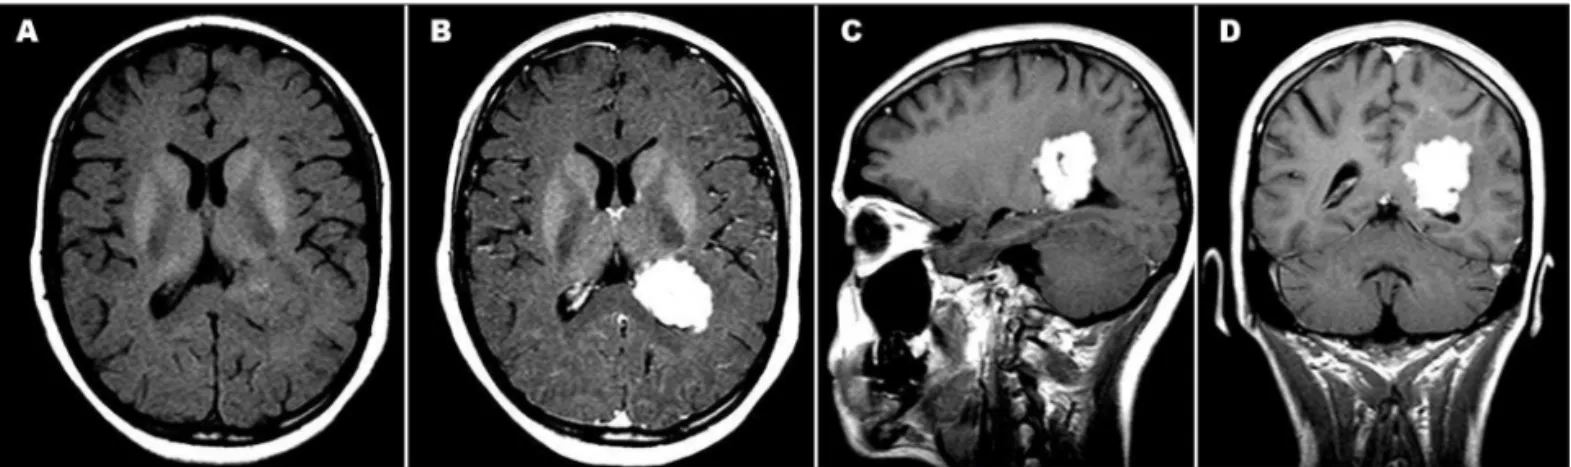 Fig 1. Brain T1-weighted MRI with a solitary 4 cm mass centred on the trigone of the left lateral ventricle